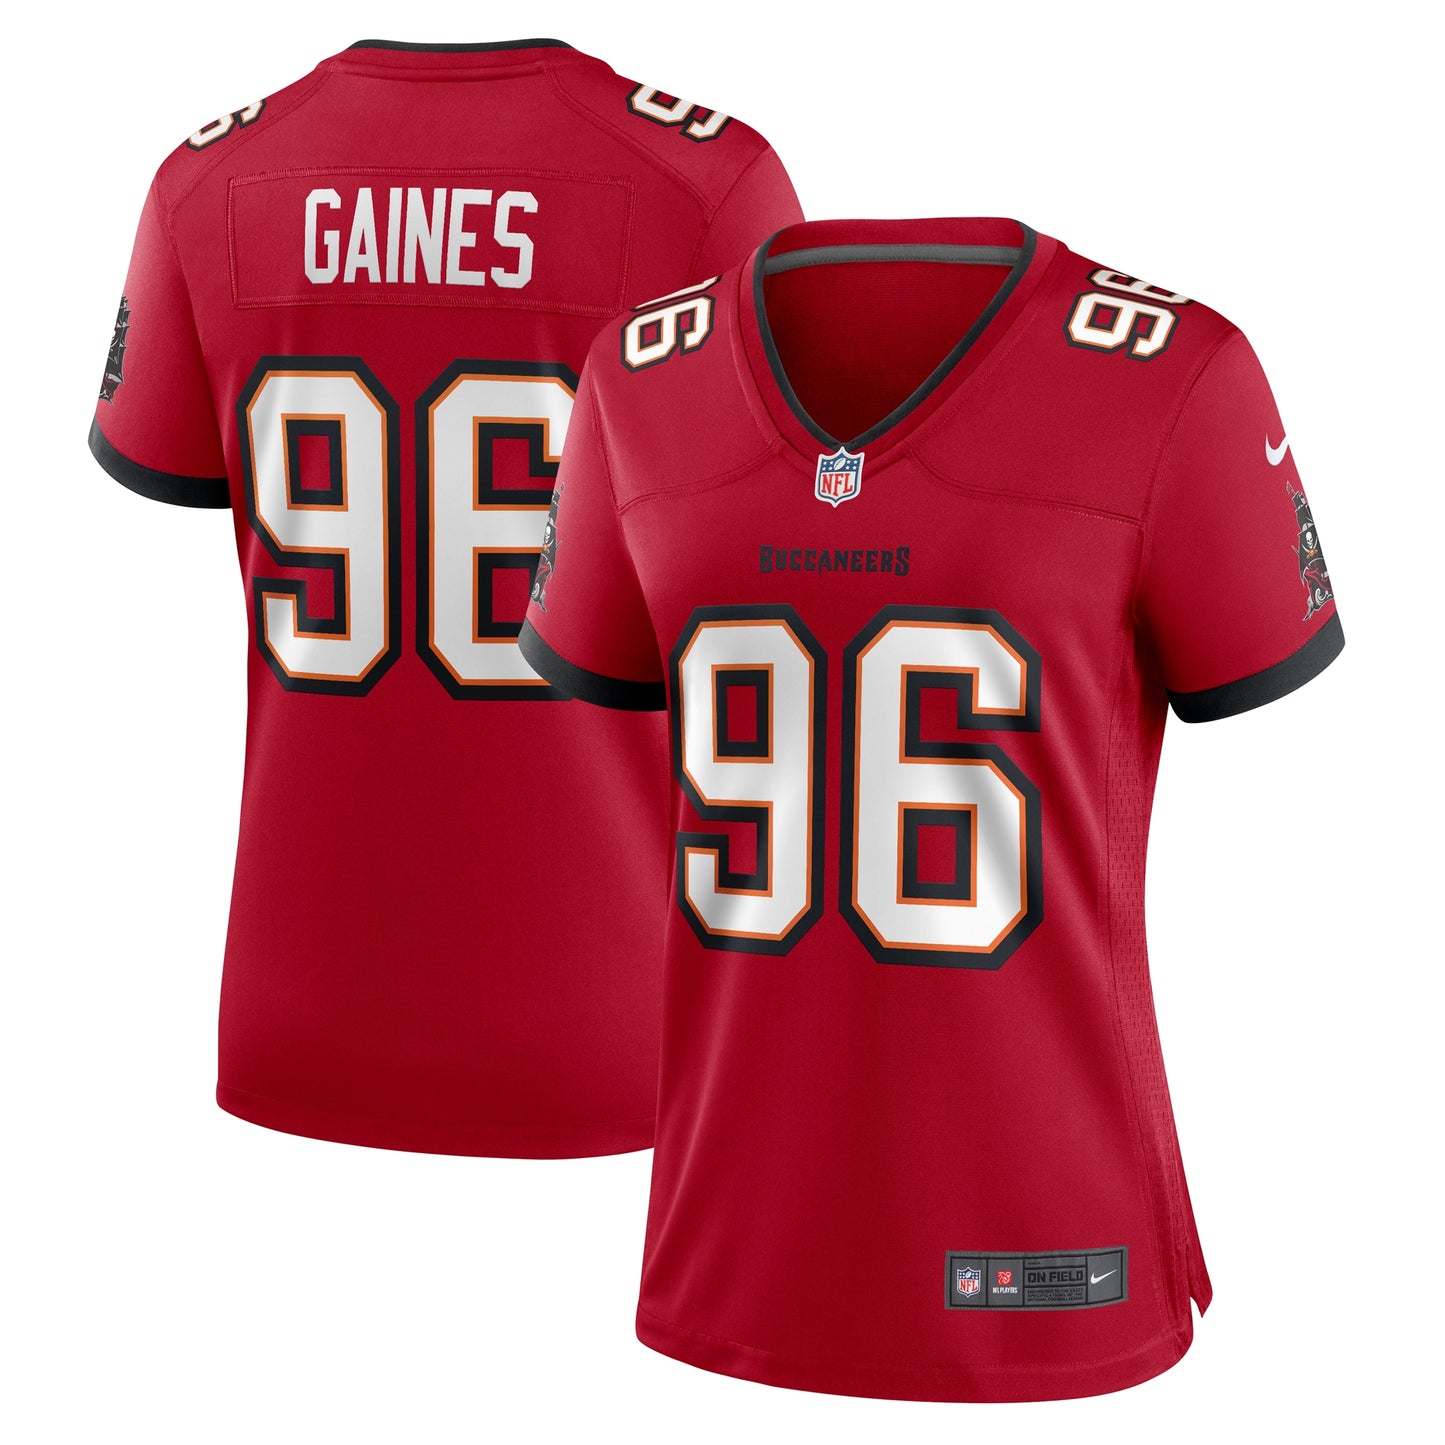 Greg Gaines Tampa Bay Buccaneers Nike Women's Game Player Jersey - Red